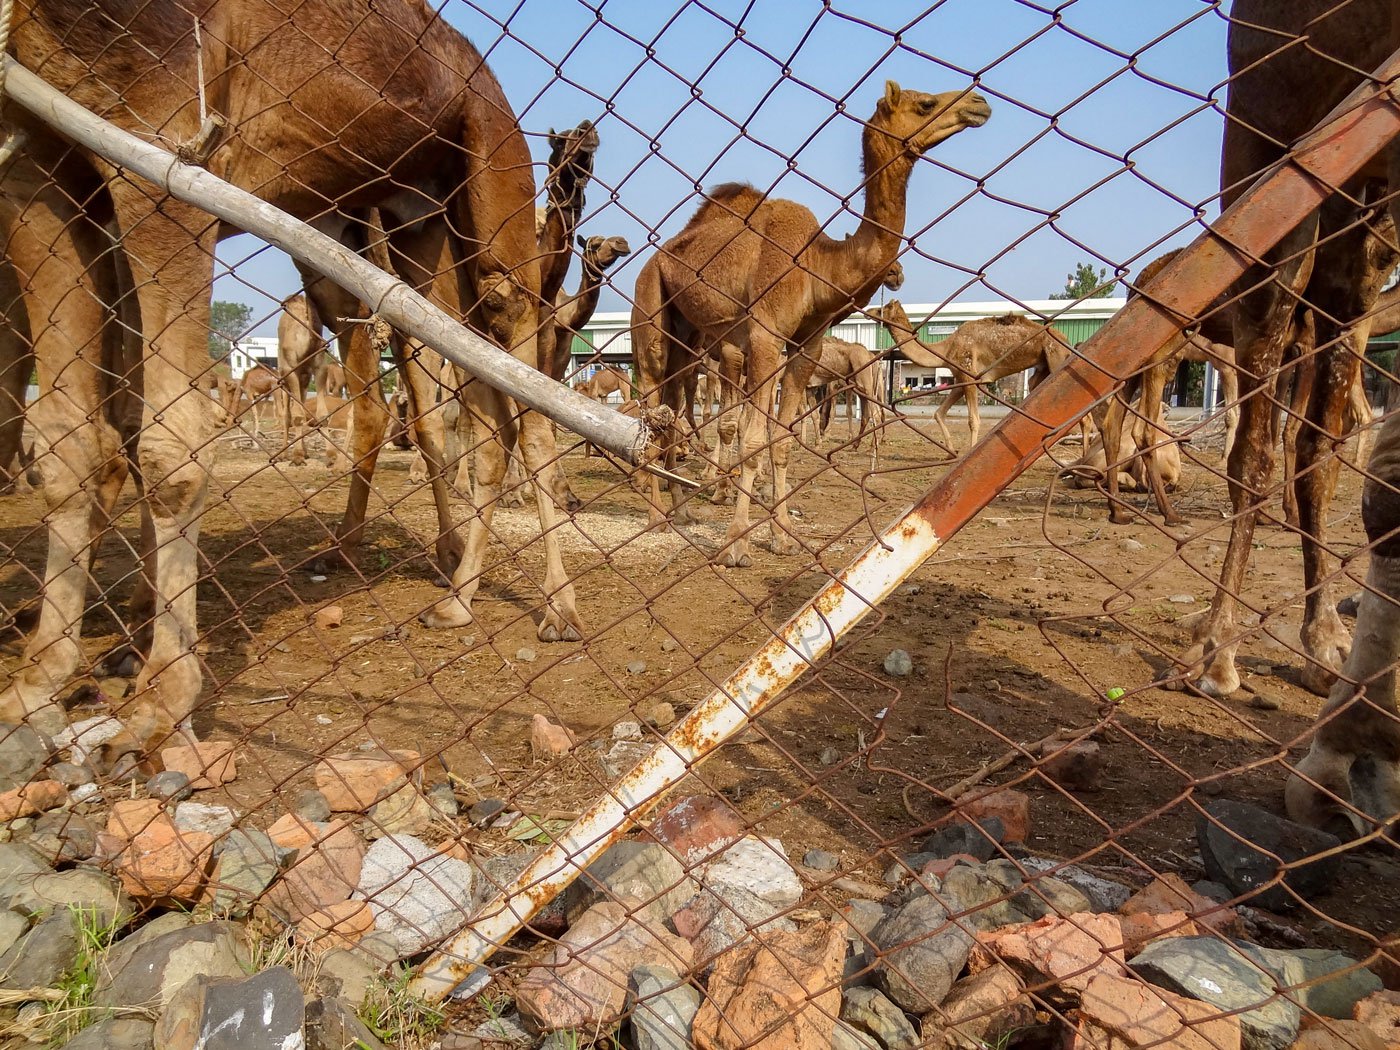 Maharashtra police detained five traditional herders from Kachchh on January 7 suspecting these semi-nomadic pastoralists were smuggling camels to slaughterhouses in Hyderabad. Also detained: 58 camels